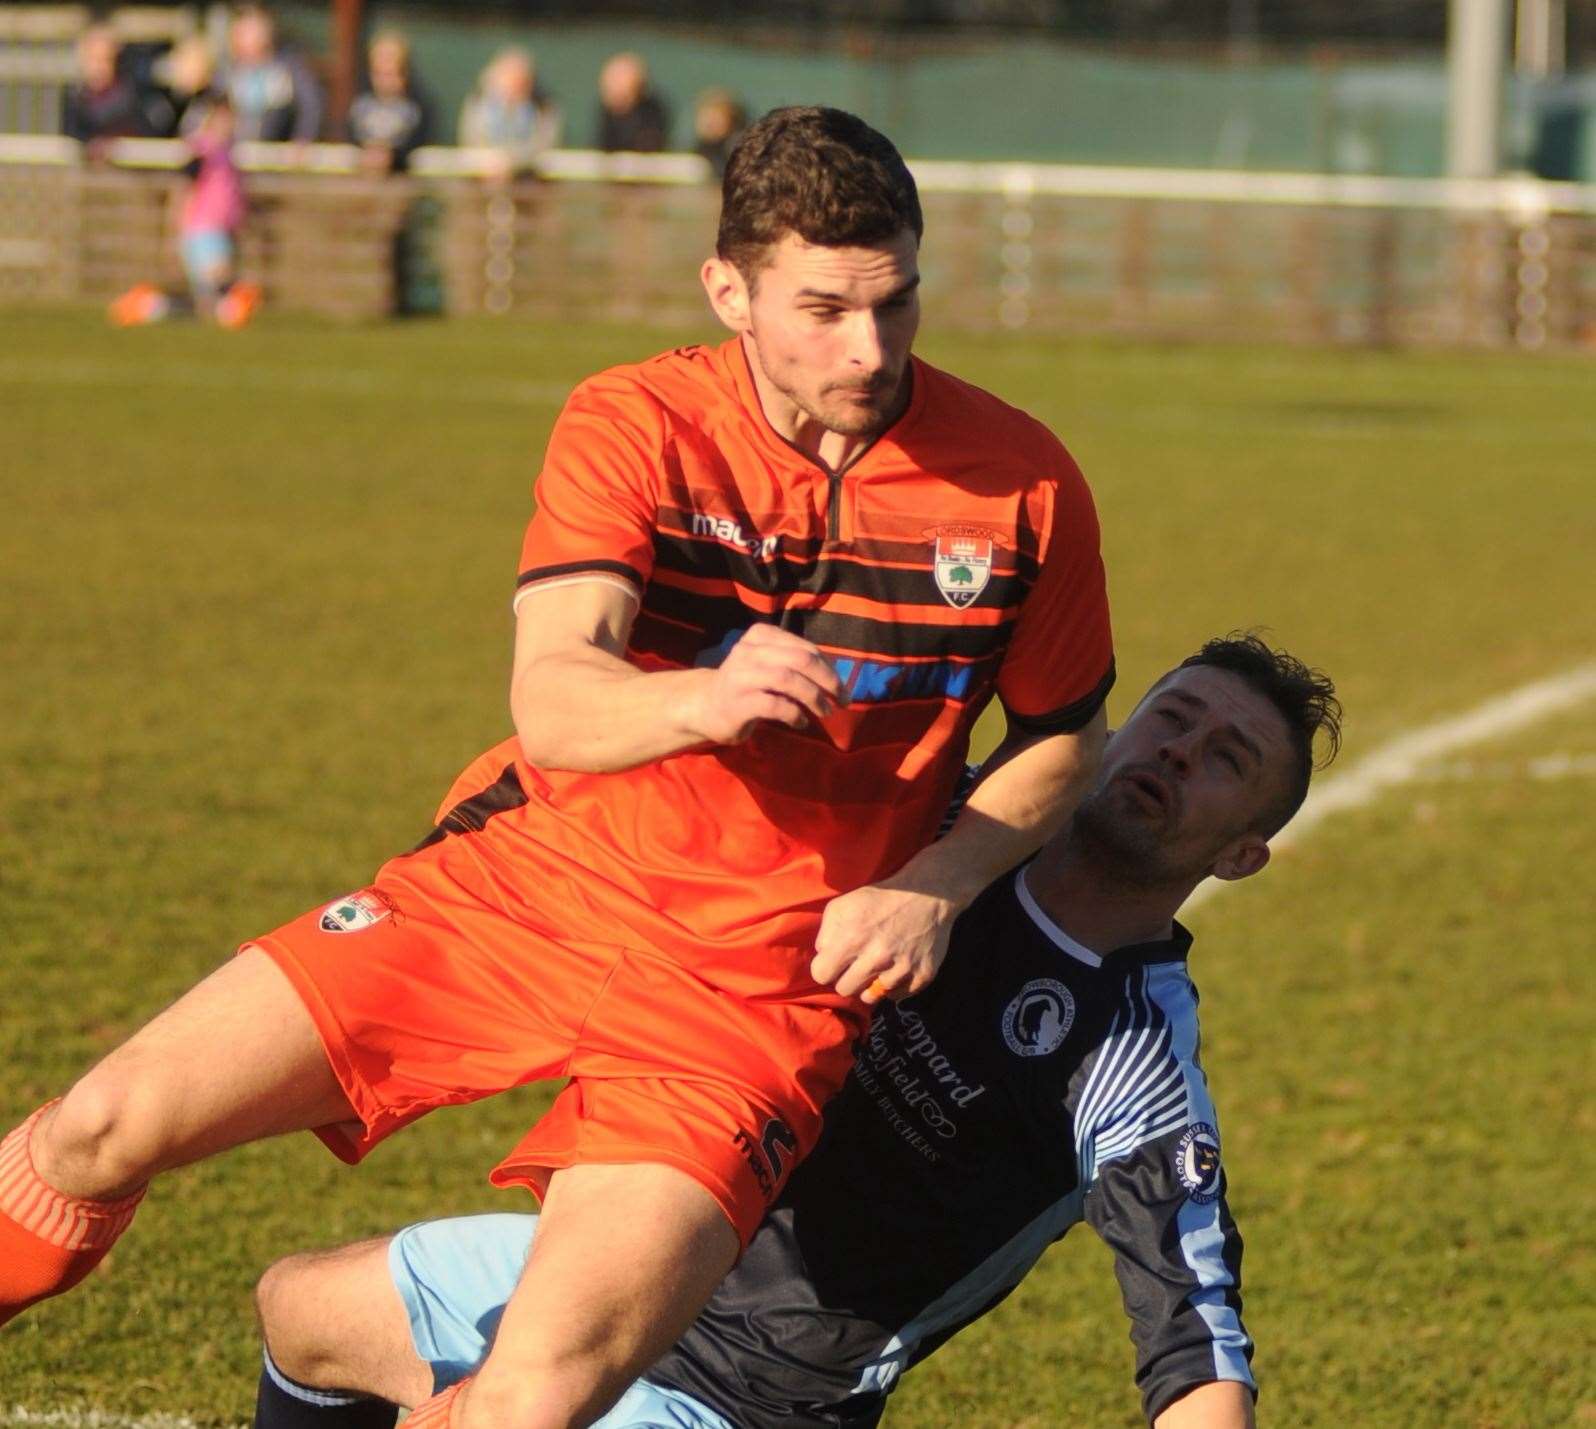 Joe Kane in action for Lordswood against Crowborough this season Picture: Steve Crispe